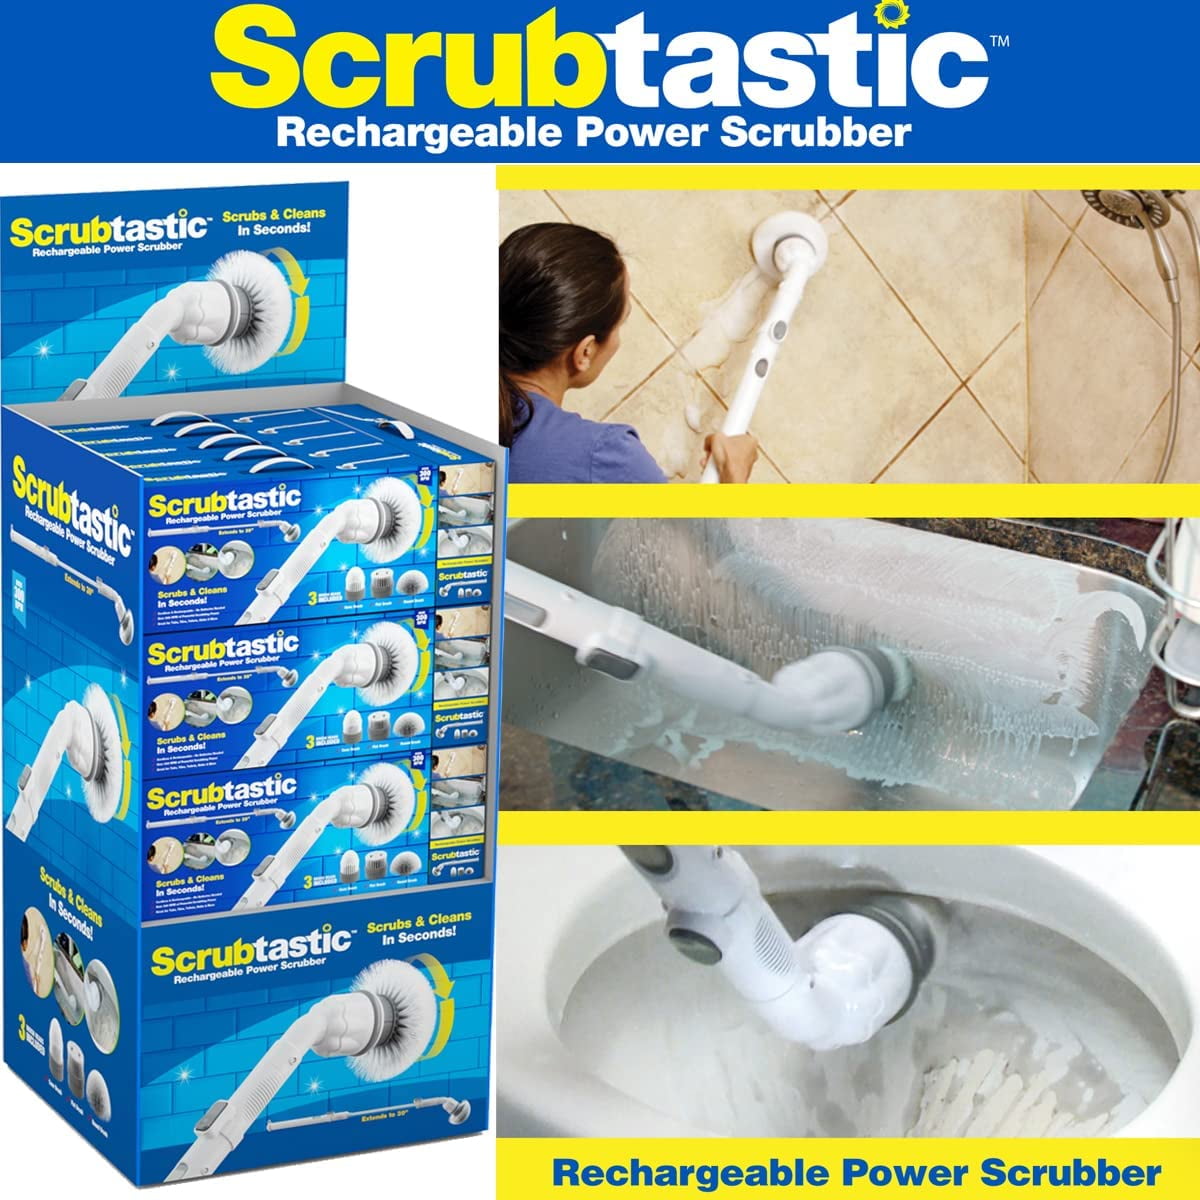 Bell + Howell Scrubtastic 39 in. Multi-Purpose Surface